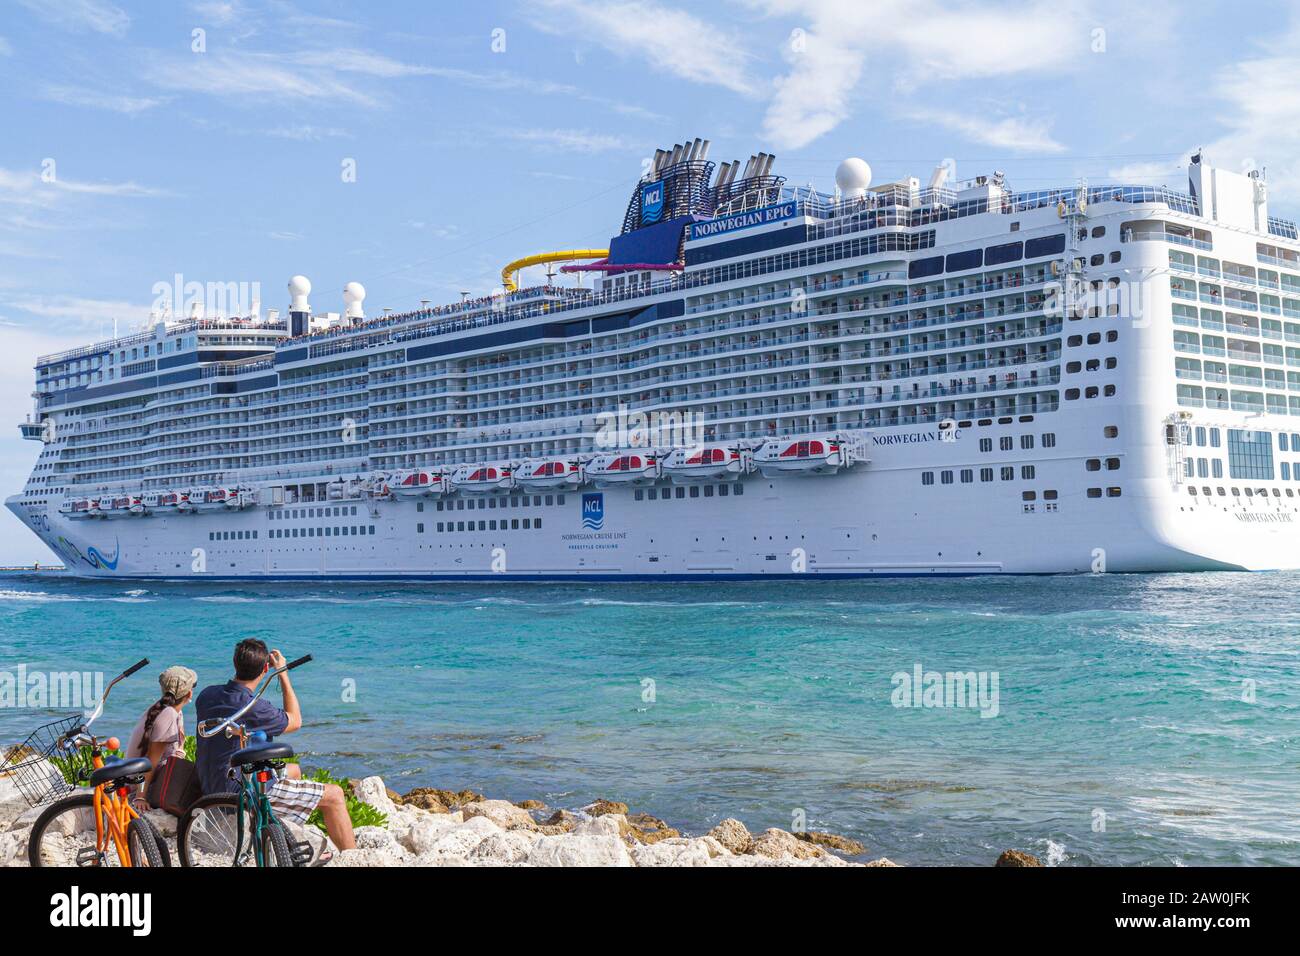 Miami Beach Florida,South Pointe Park,Point,Government Cut,Port of Miami,departing cruise ship,Norwegian Epic,NCL,couple watching,bicycles,visitors tr Stock Photo